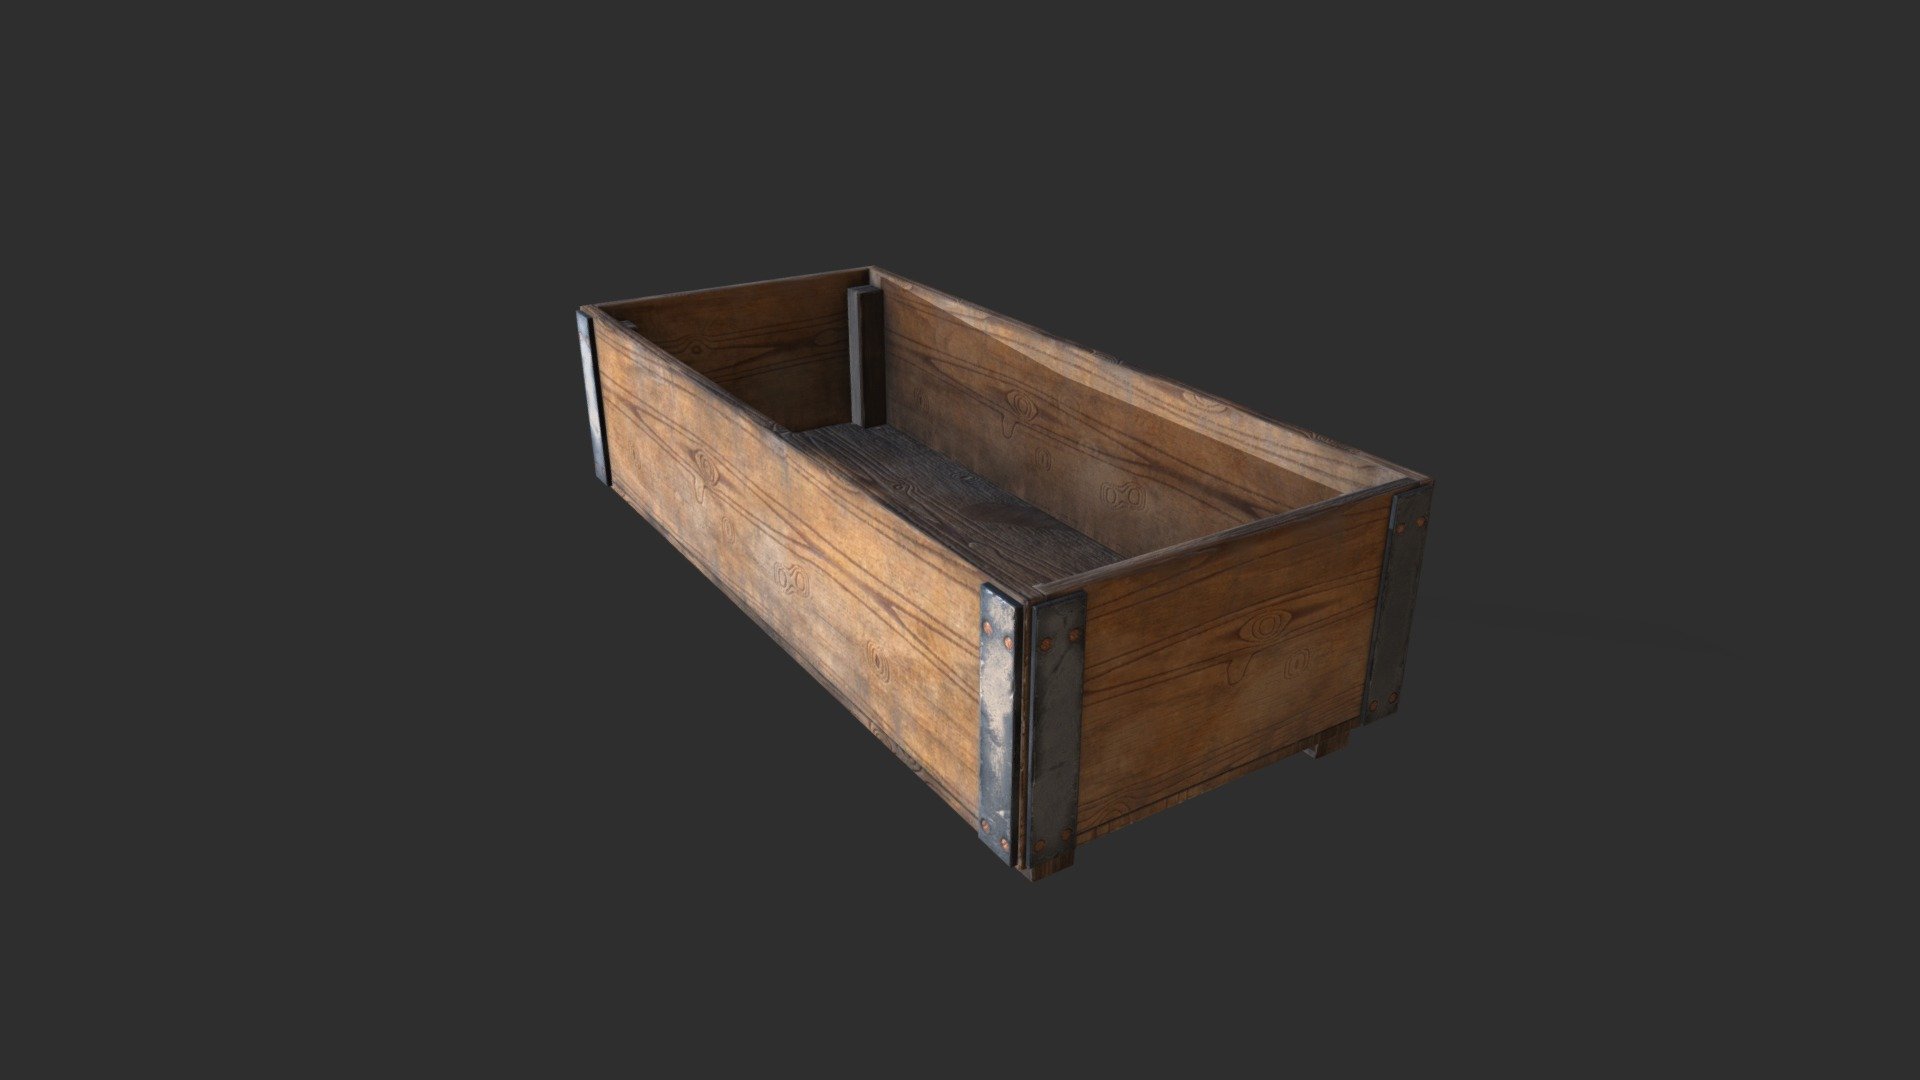 A simple low poly medieval style crate!
Baked with high poly textures 3d model